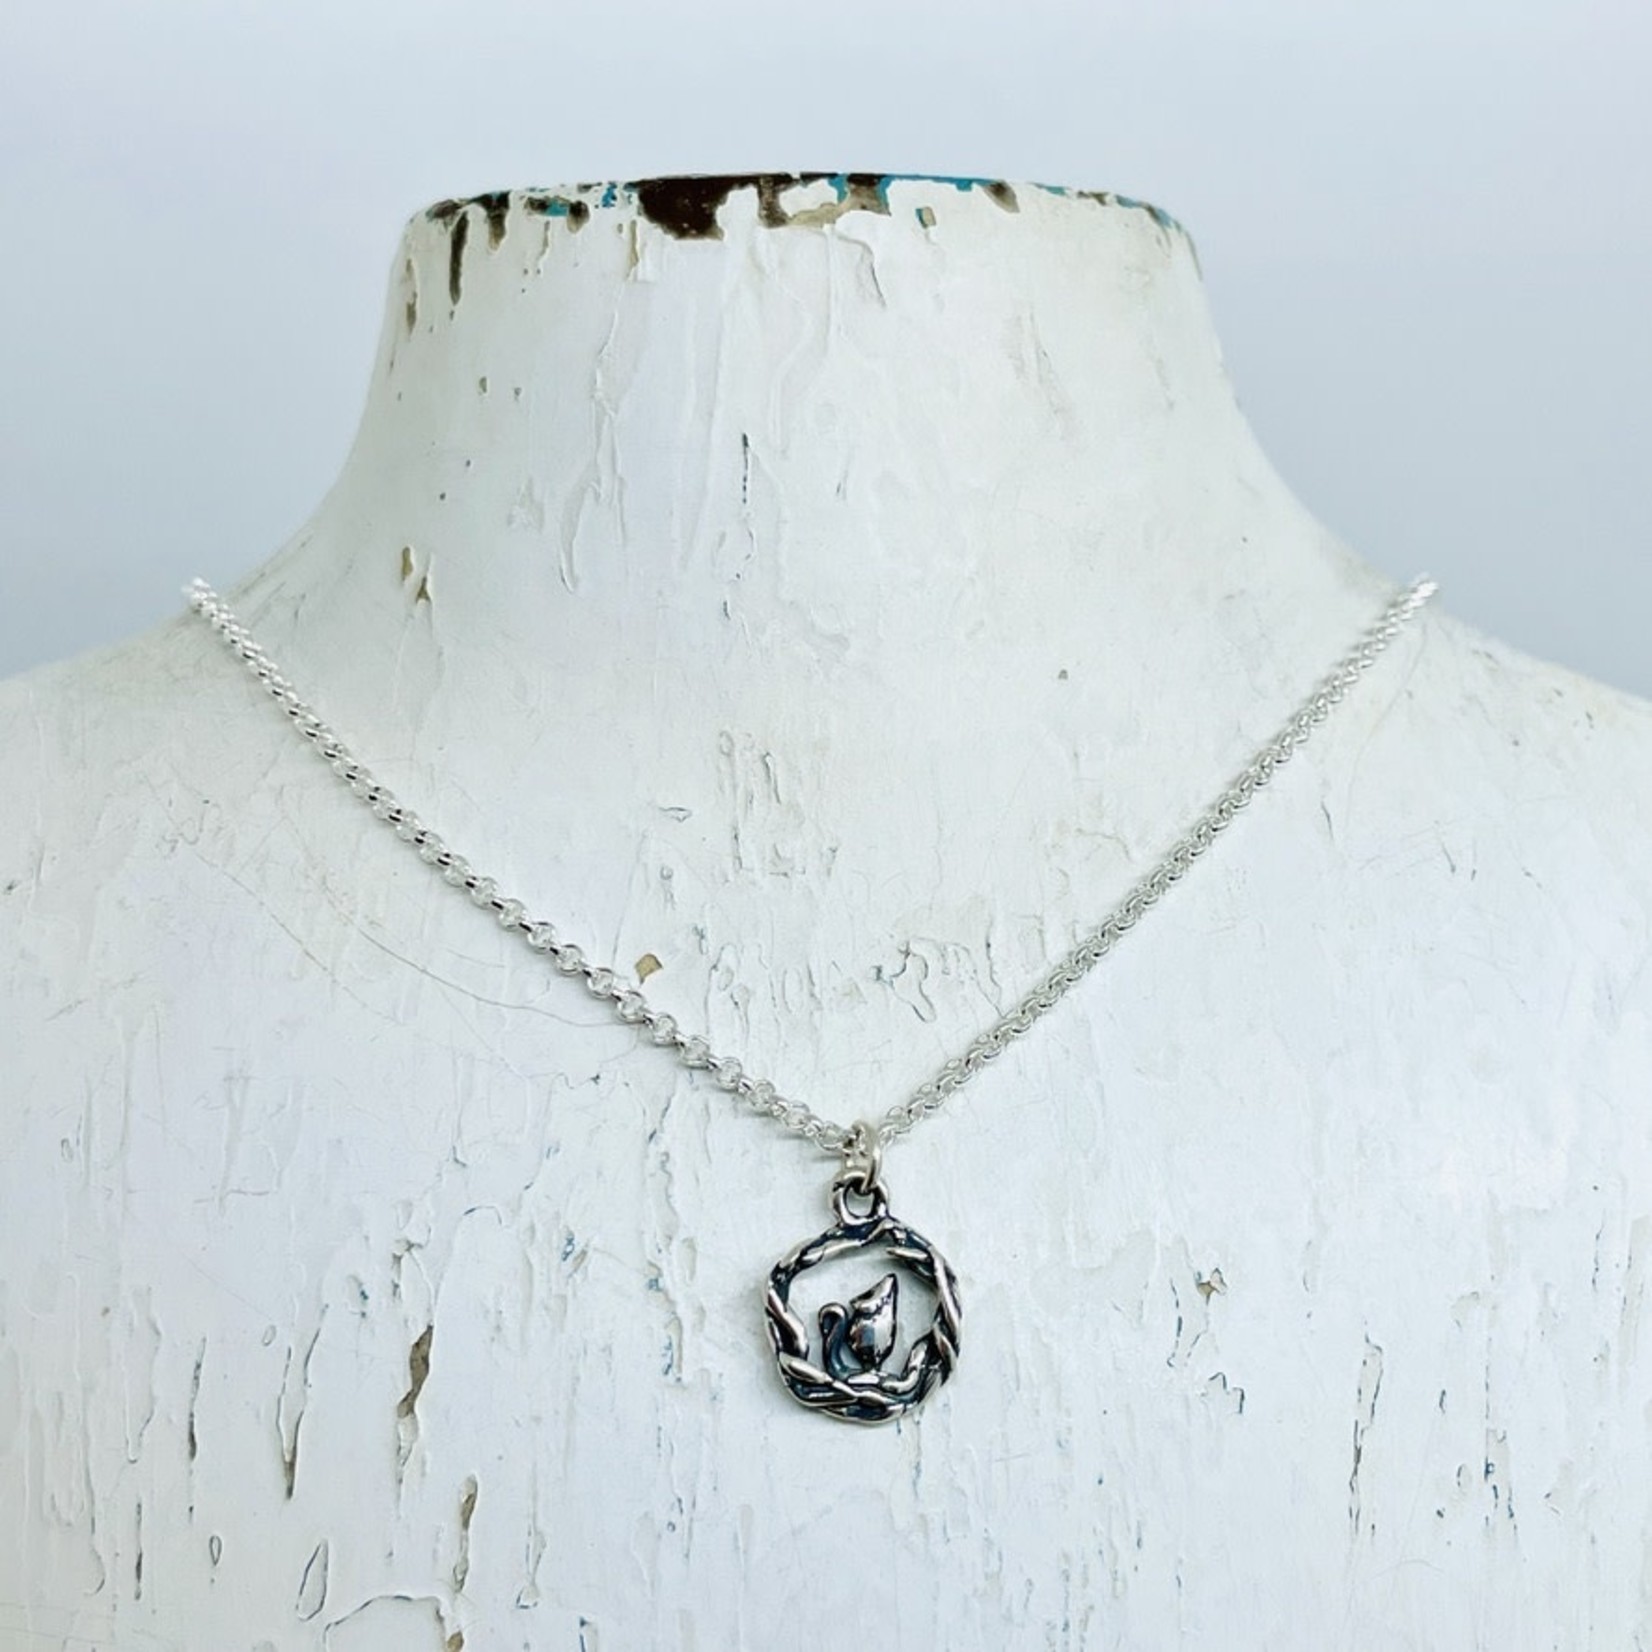 Silver Bramble Jewelry Handmade Mouse Necklace in Silver